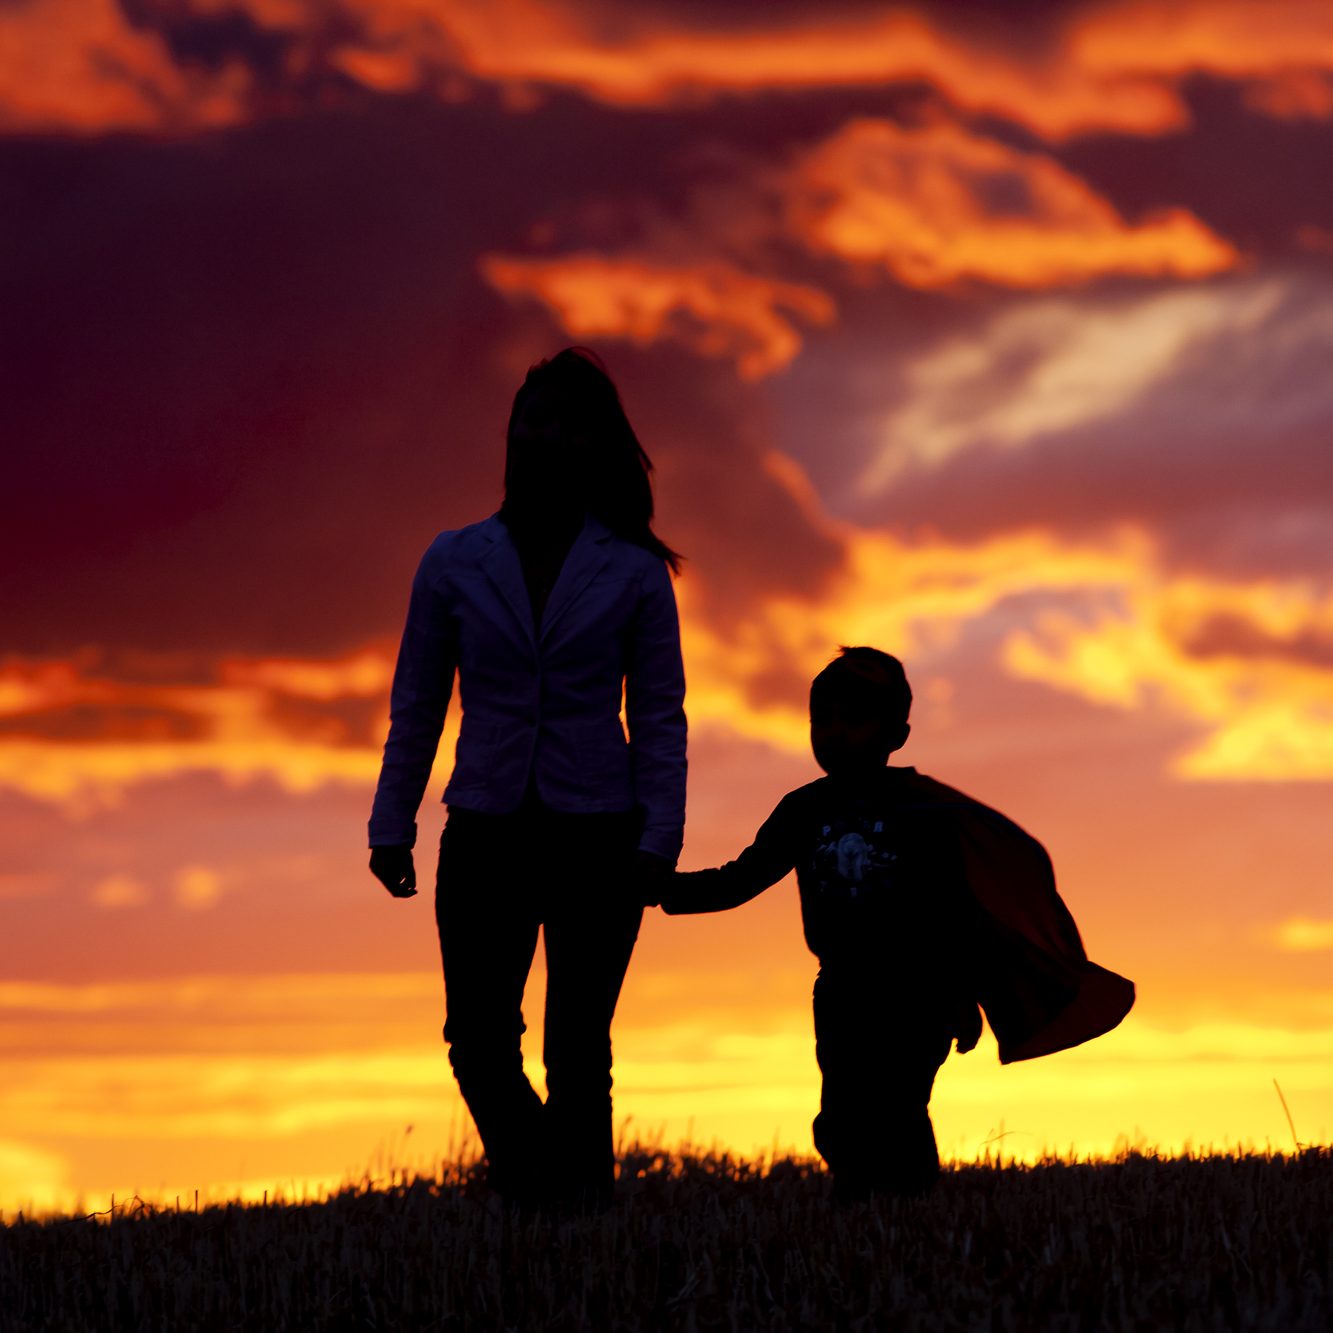 A tender moment of a mom and her son walking along at sunset.